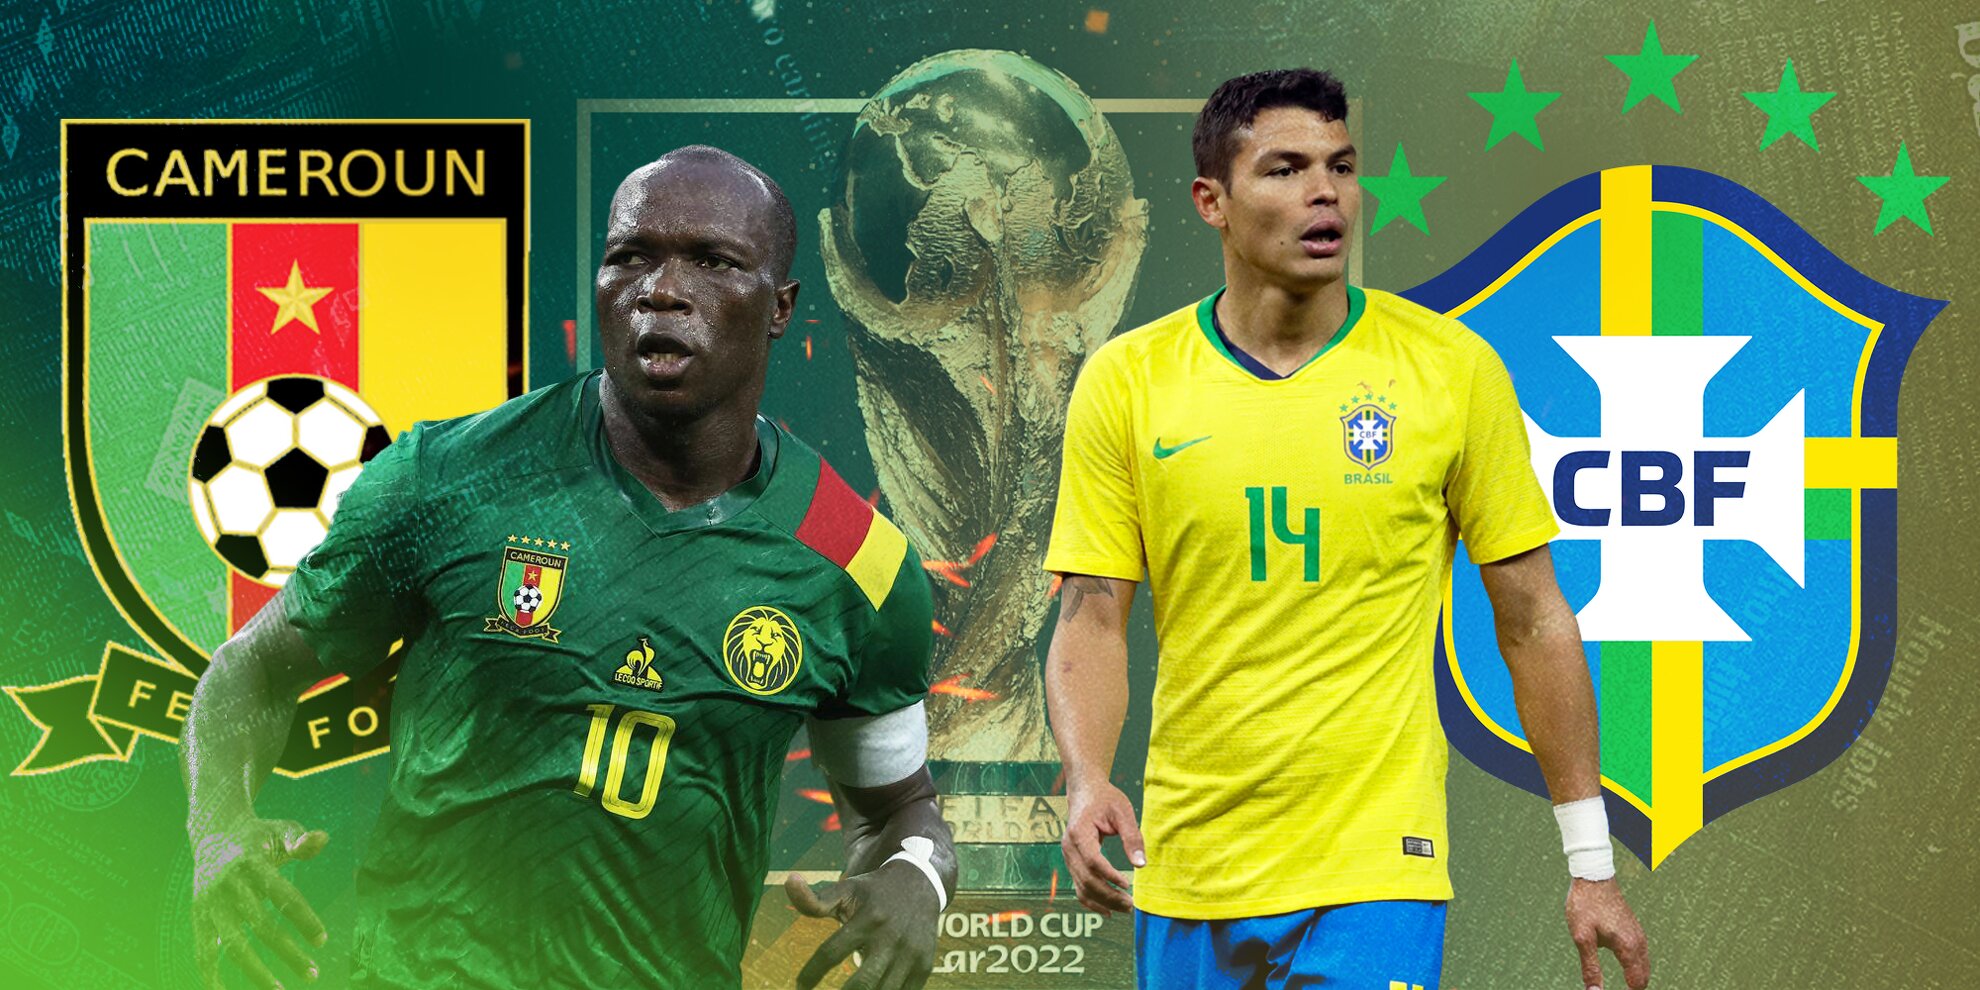 Cameroon vs Brazil: Predicted lineup. Injury news and head-to-head